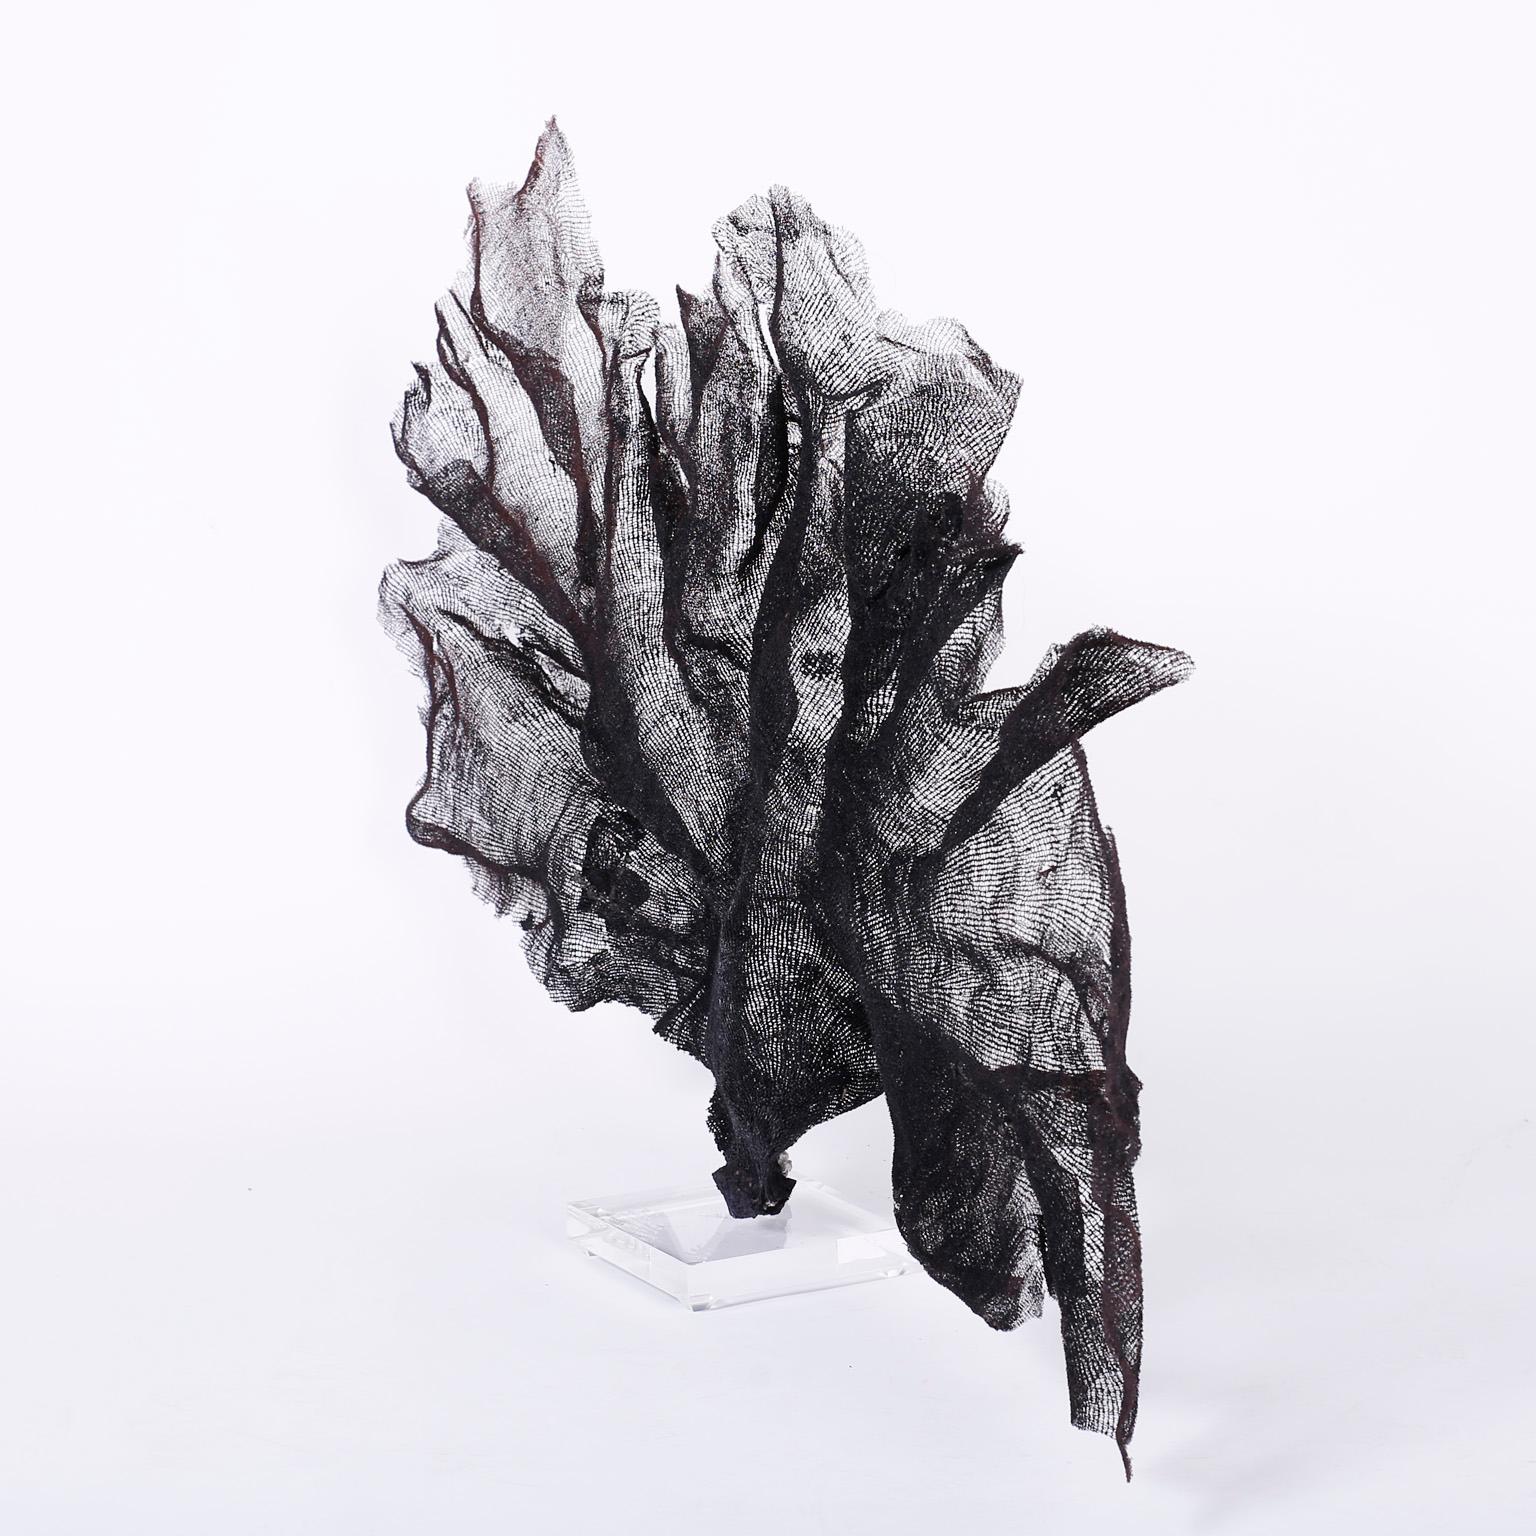 Impressive black sea fan with a poetic form and familiar fishnet texture. Mother Nature's sculptural prowess is on display here mounted on a Lucite base.